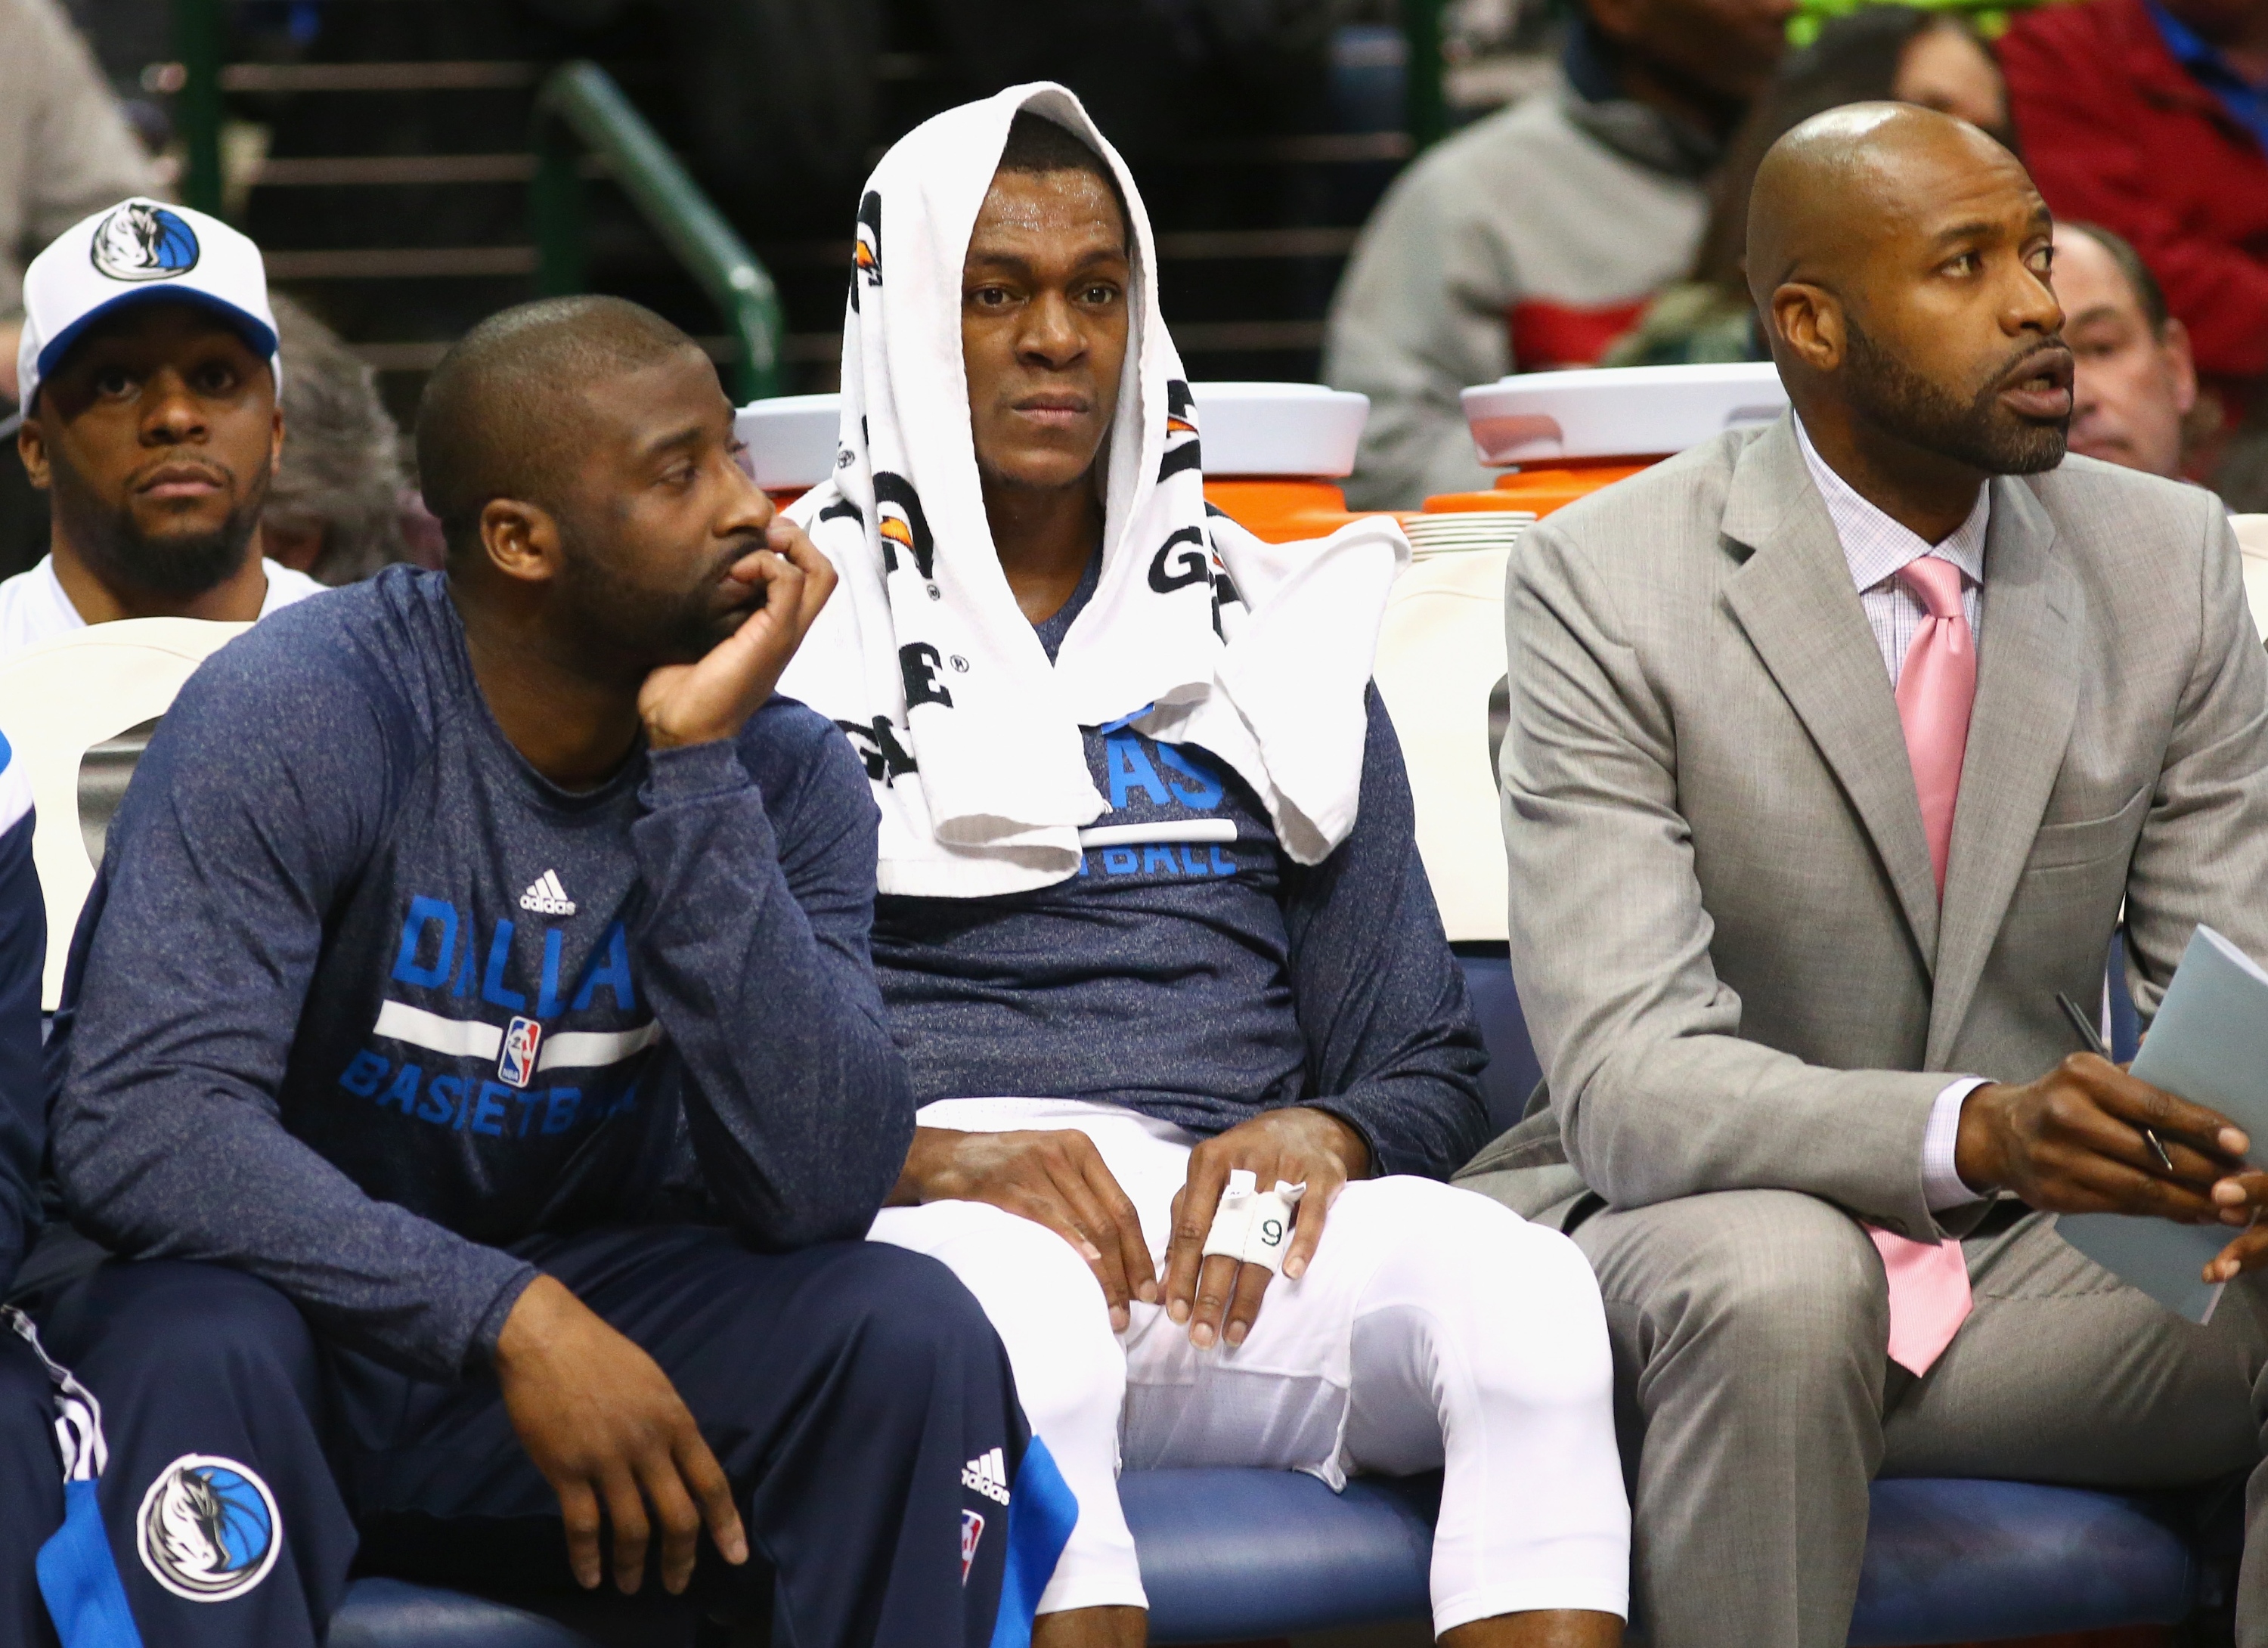 DALLAS, TX - FEBRUARY 24:  Rajon Rondo #9 of the Dallas Mavericks sits on the bench during play against the Toronto Raptors at American Airlines Center on February 24, 2015 in Dallas, Texas.  NOTE TO USER: User expressly acknowledges and agrees that, by downloading and or using this photograph, User is consenting to the terms and conditions of the Getty Images License Agreement.  (Photo by Ronald Martinez/Getty Images)